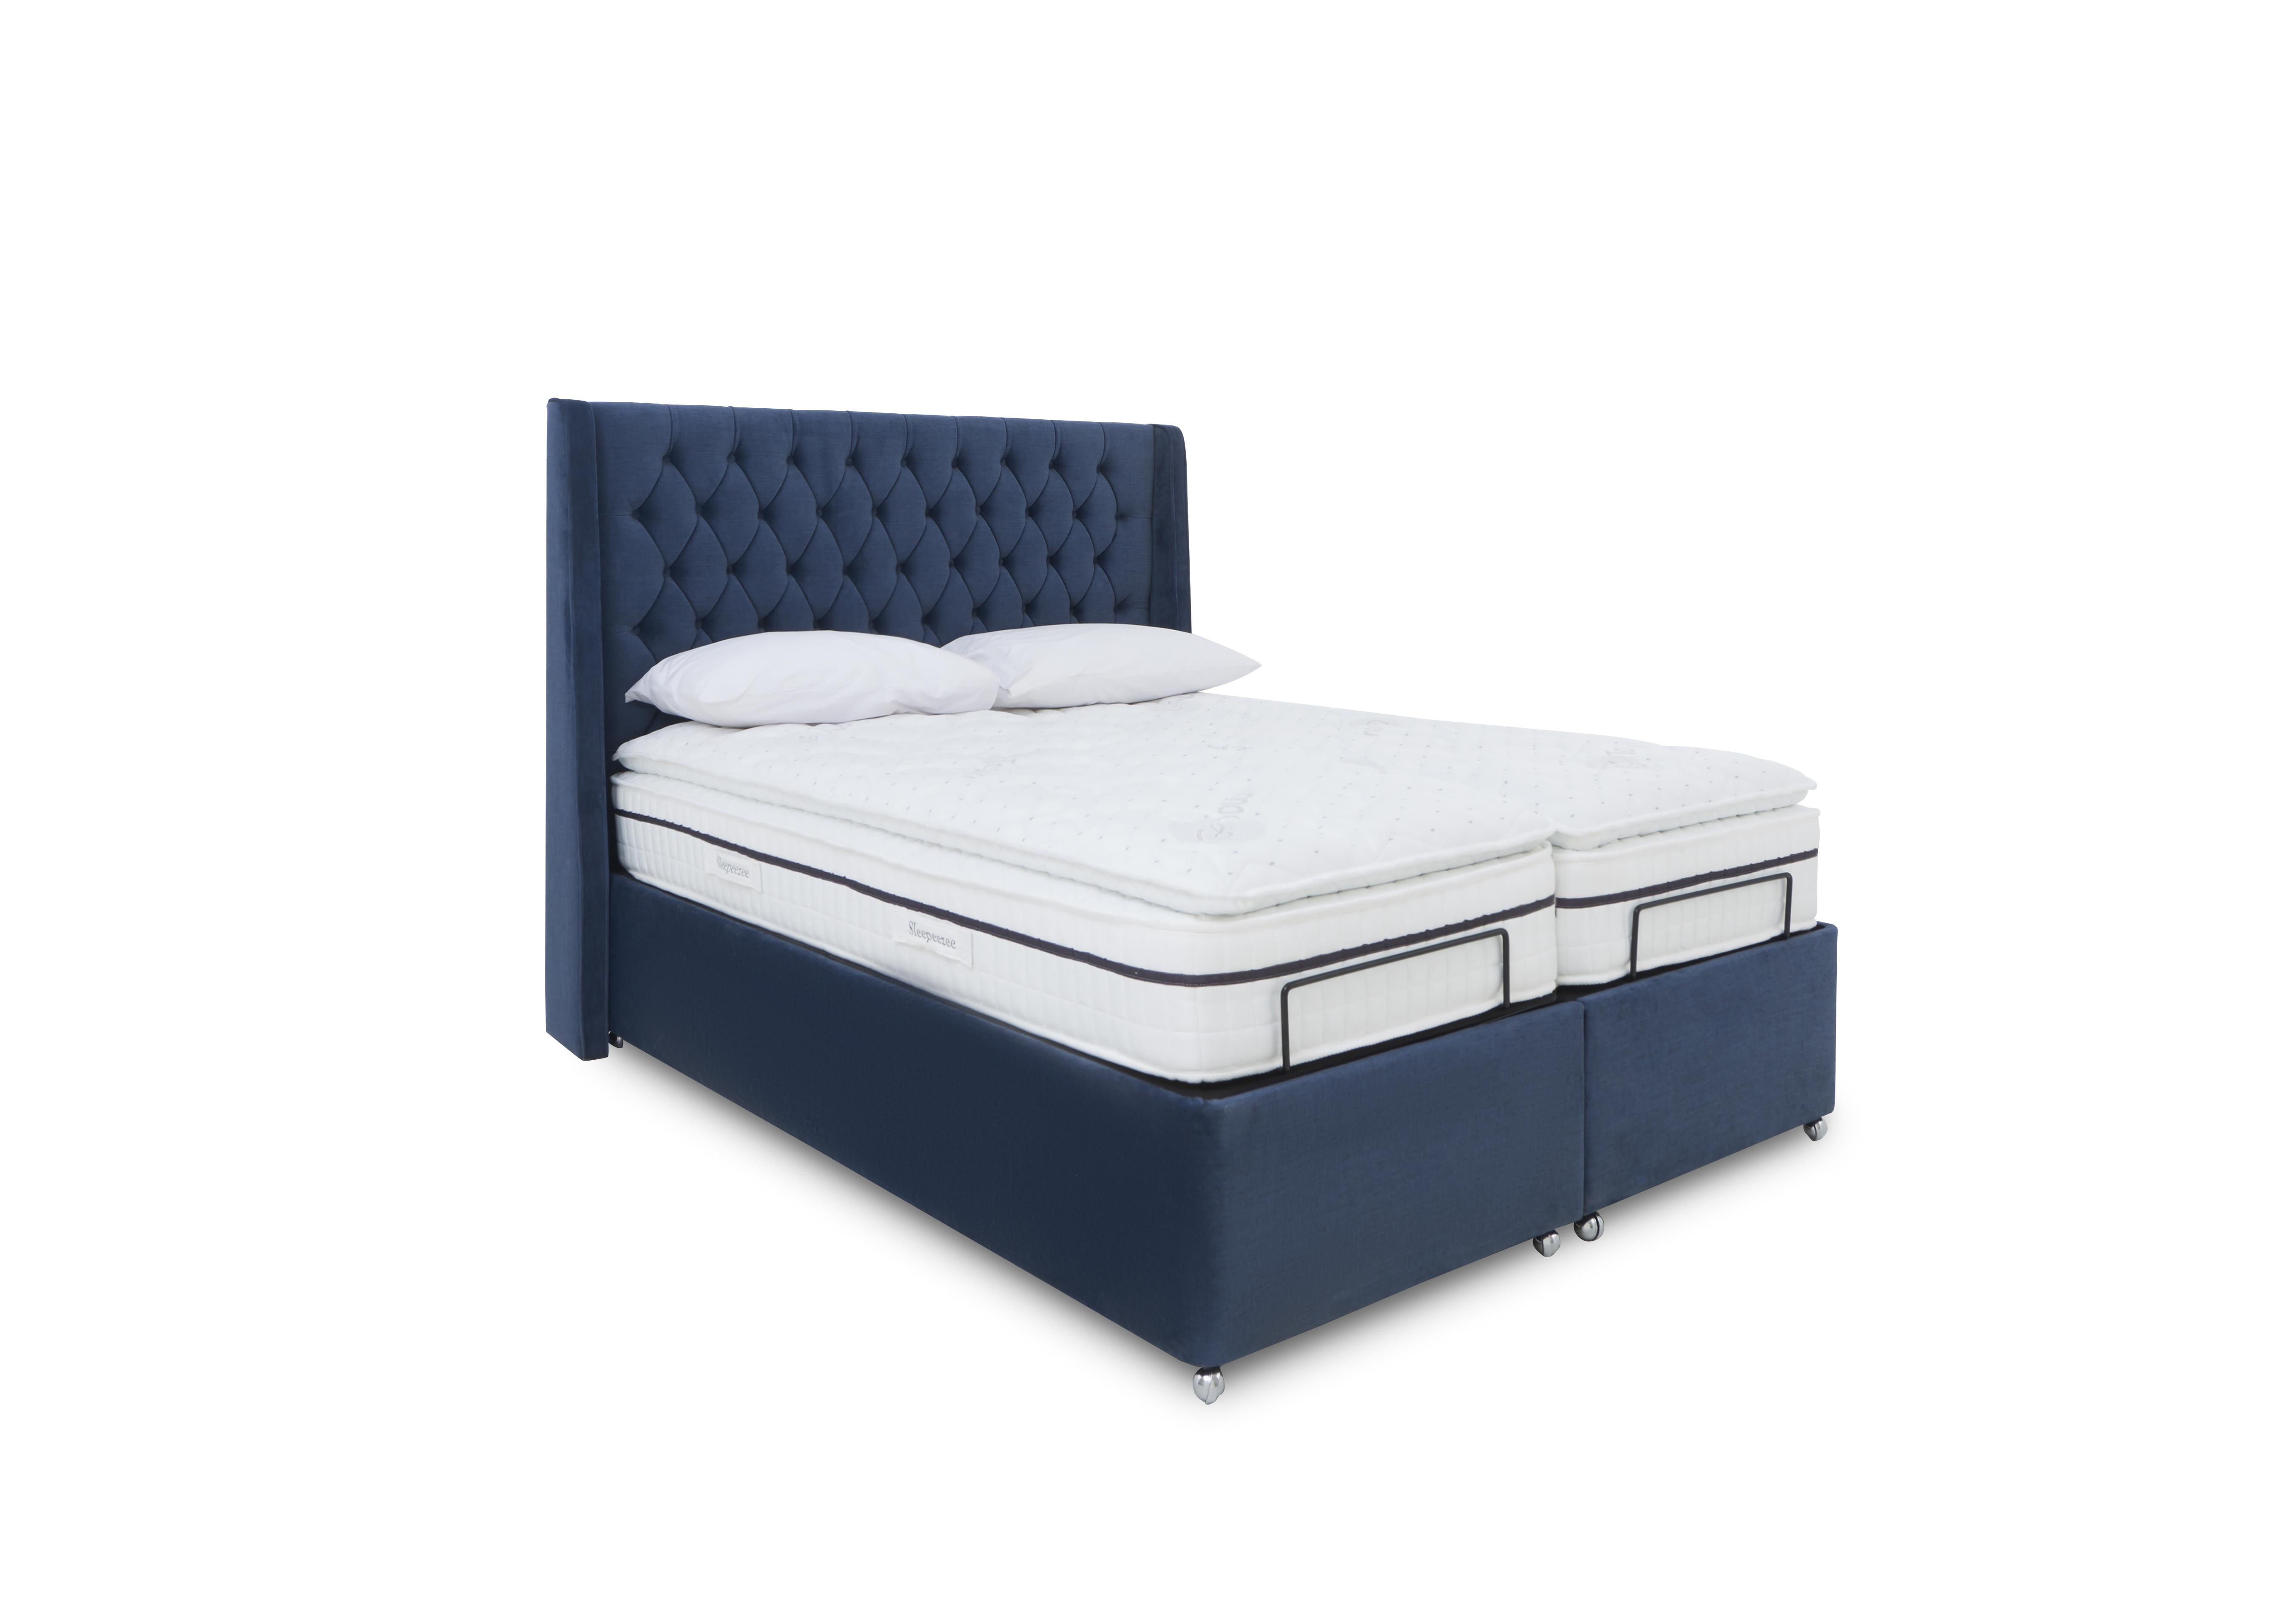 E-Motion Zen Dual Adjustable Ottoman Divan Base with Massage Function and Headboard in 600 Granite Blue on Furniture Village